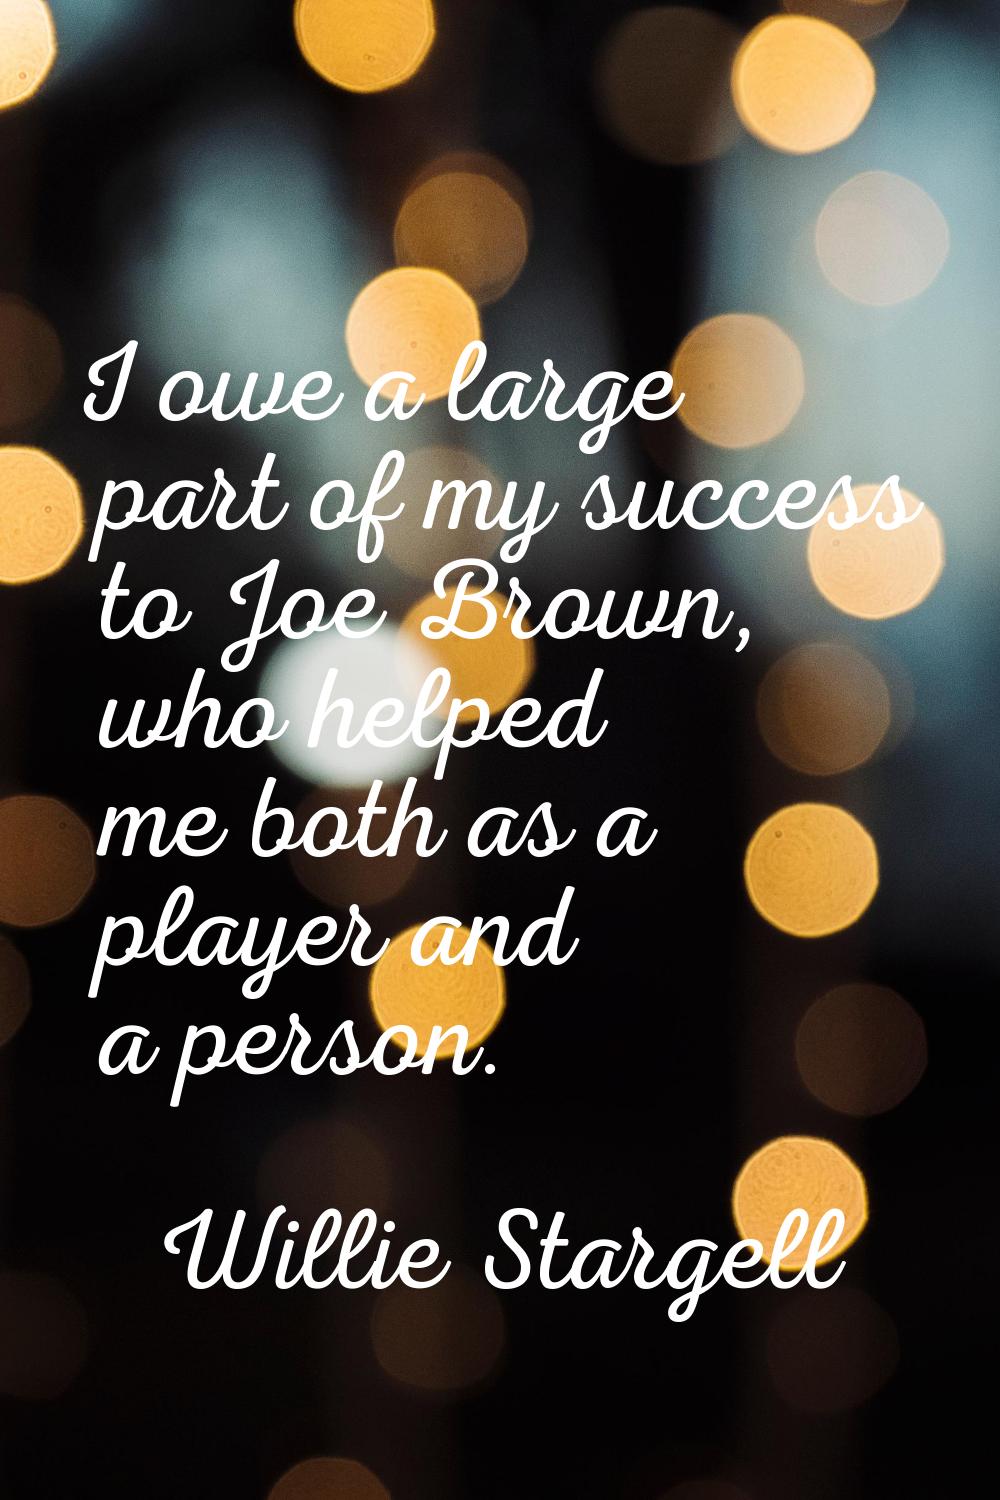 I owe a large part of my success to Joe Brown, who helped me both as a player and a person.